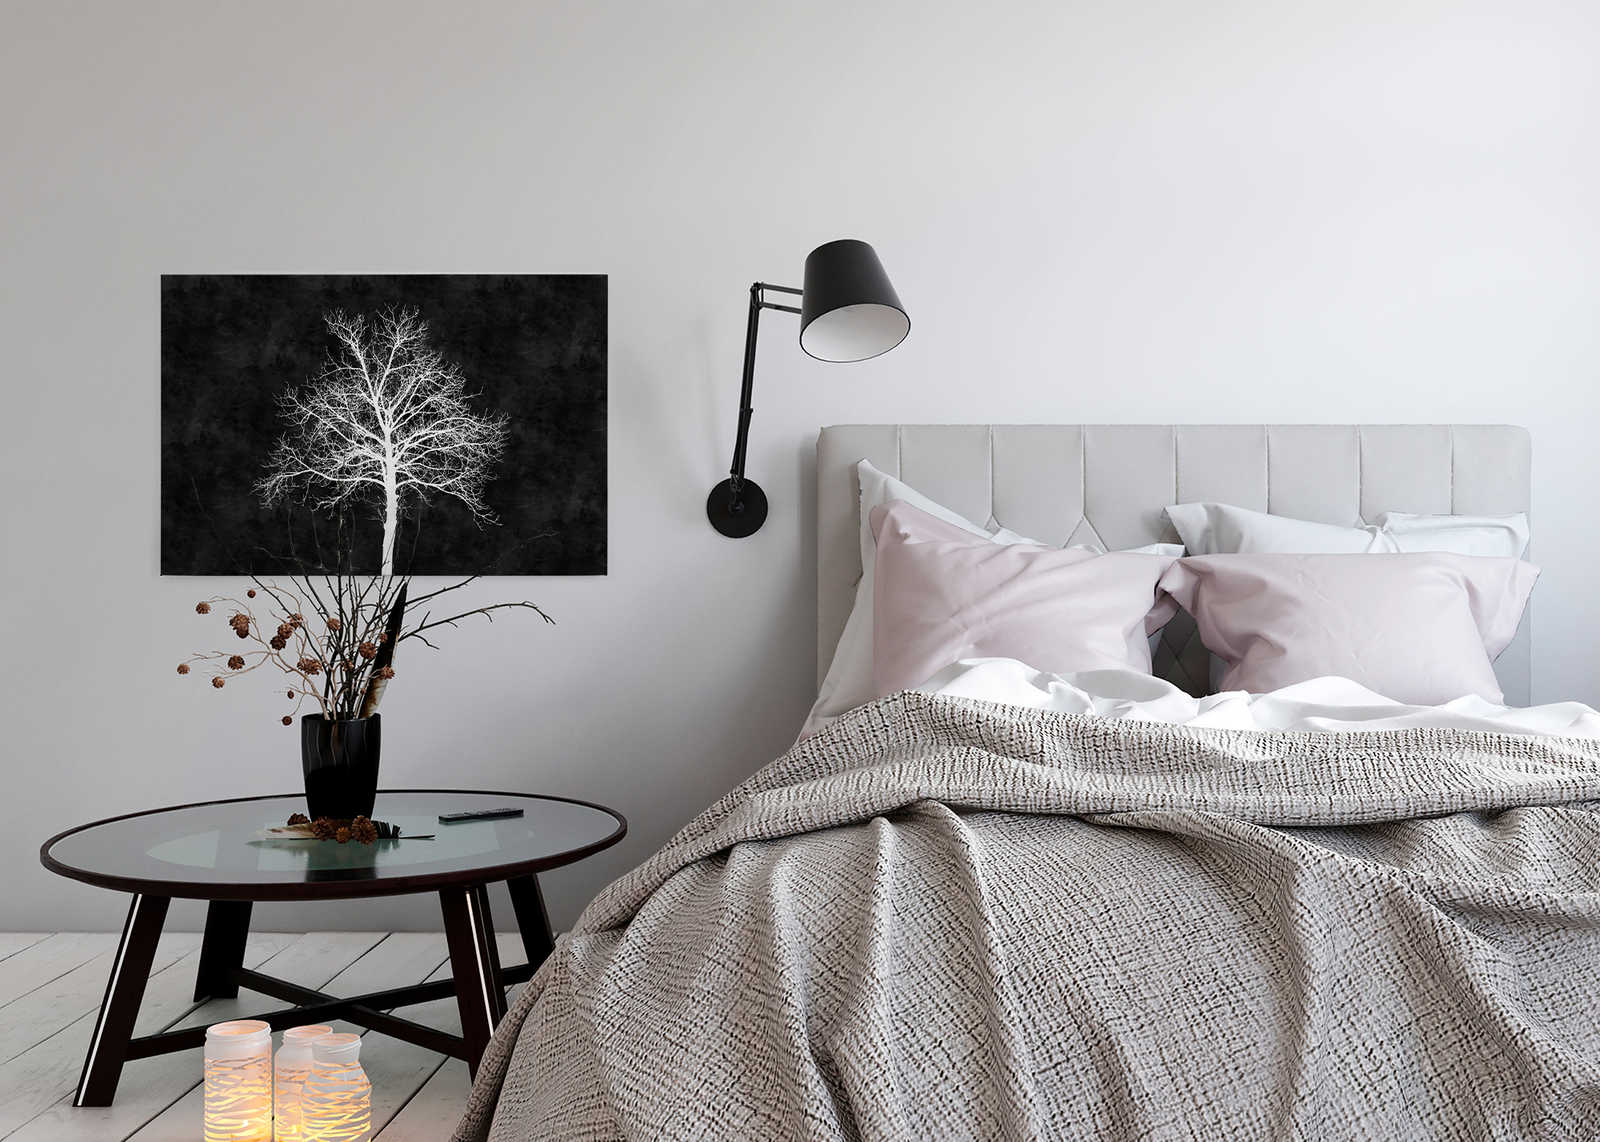             Black and White Canvas Painting White Tree - 0.90 m x 0.60 m
        